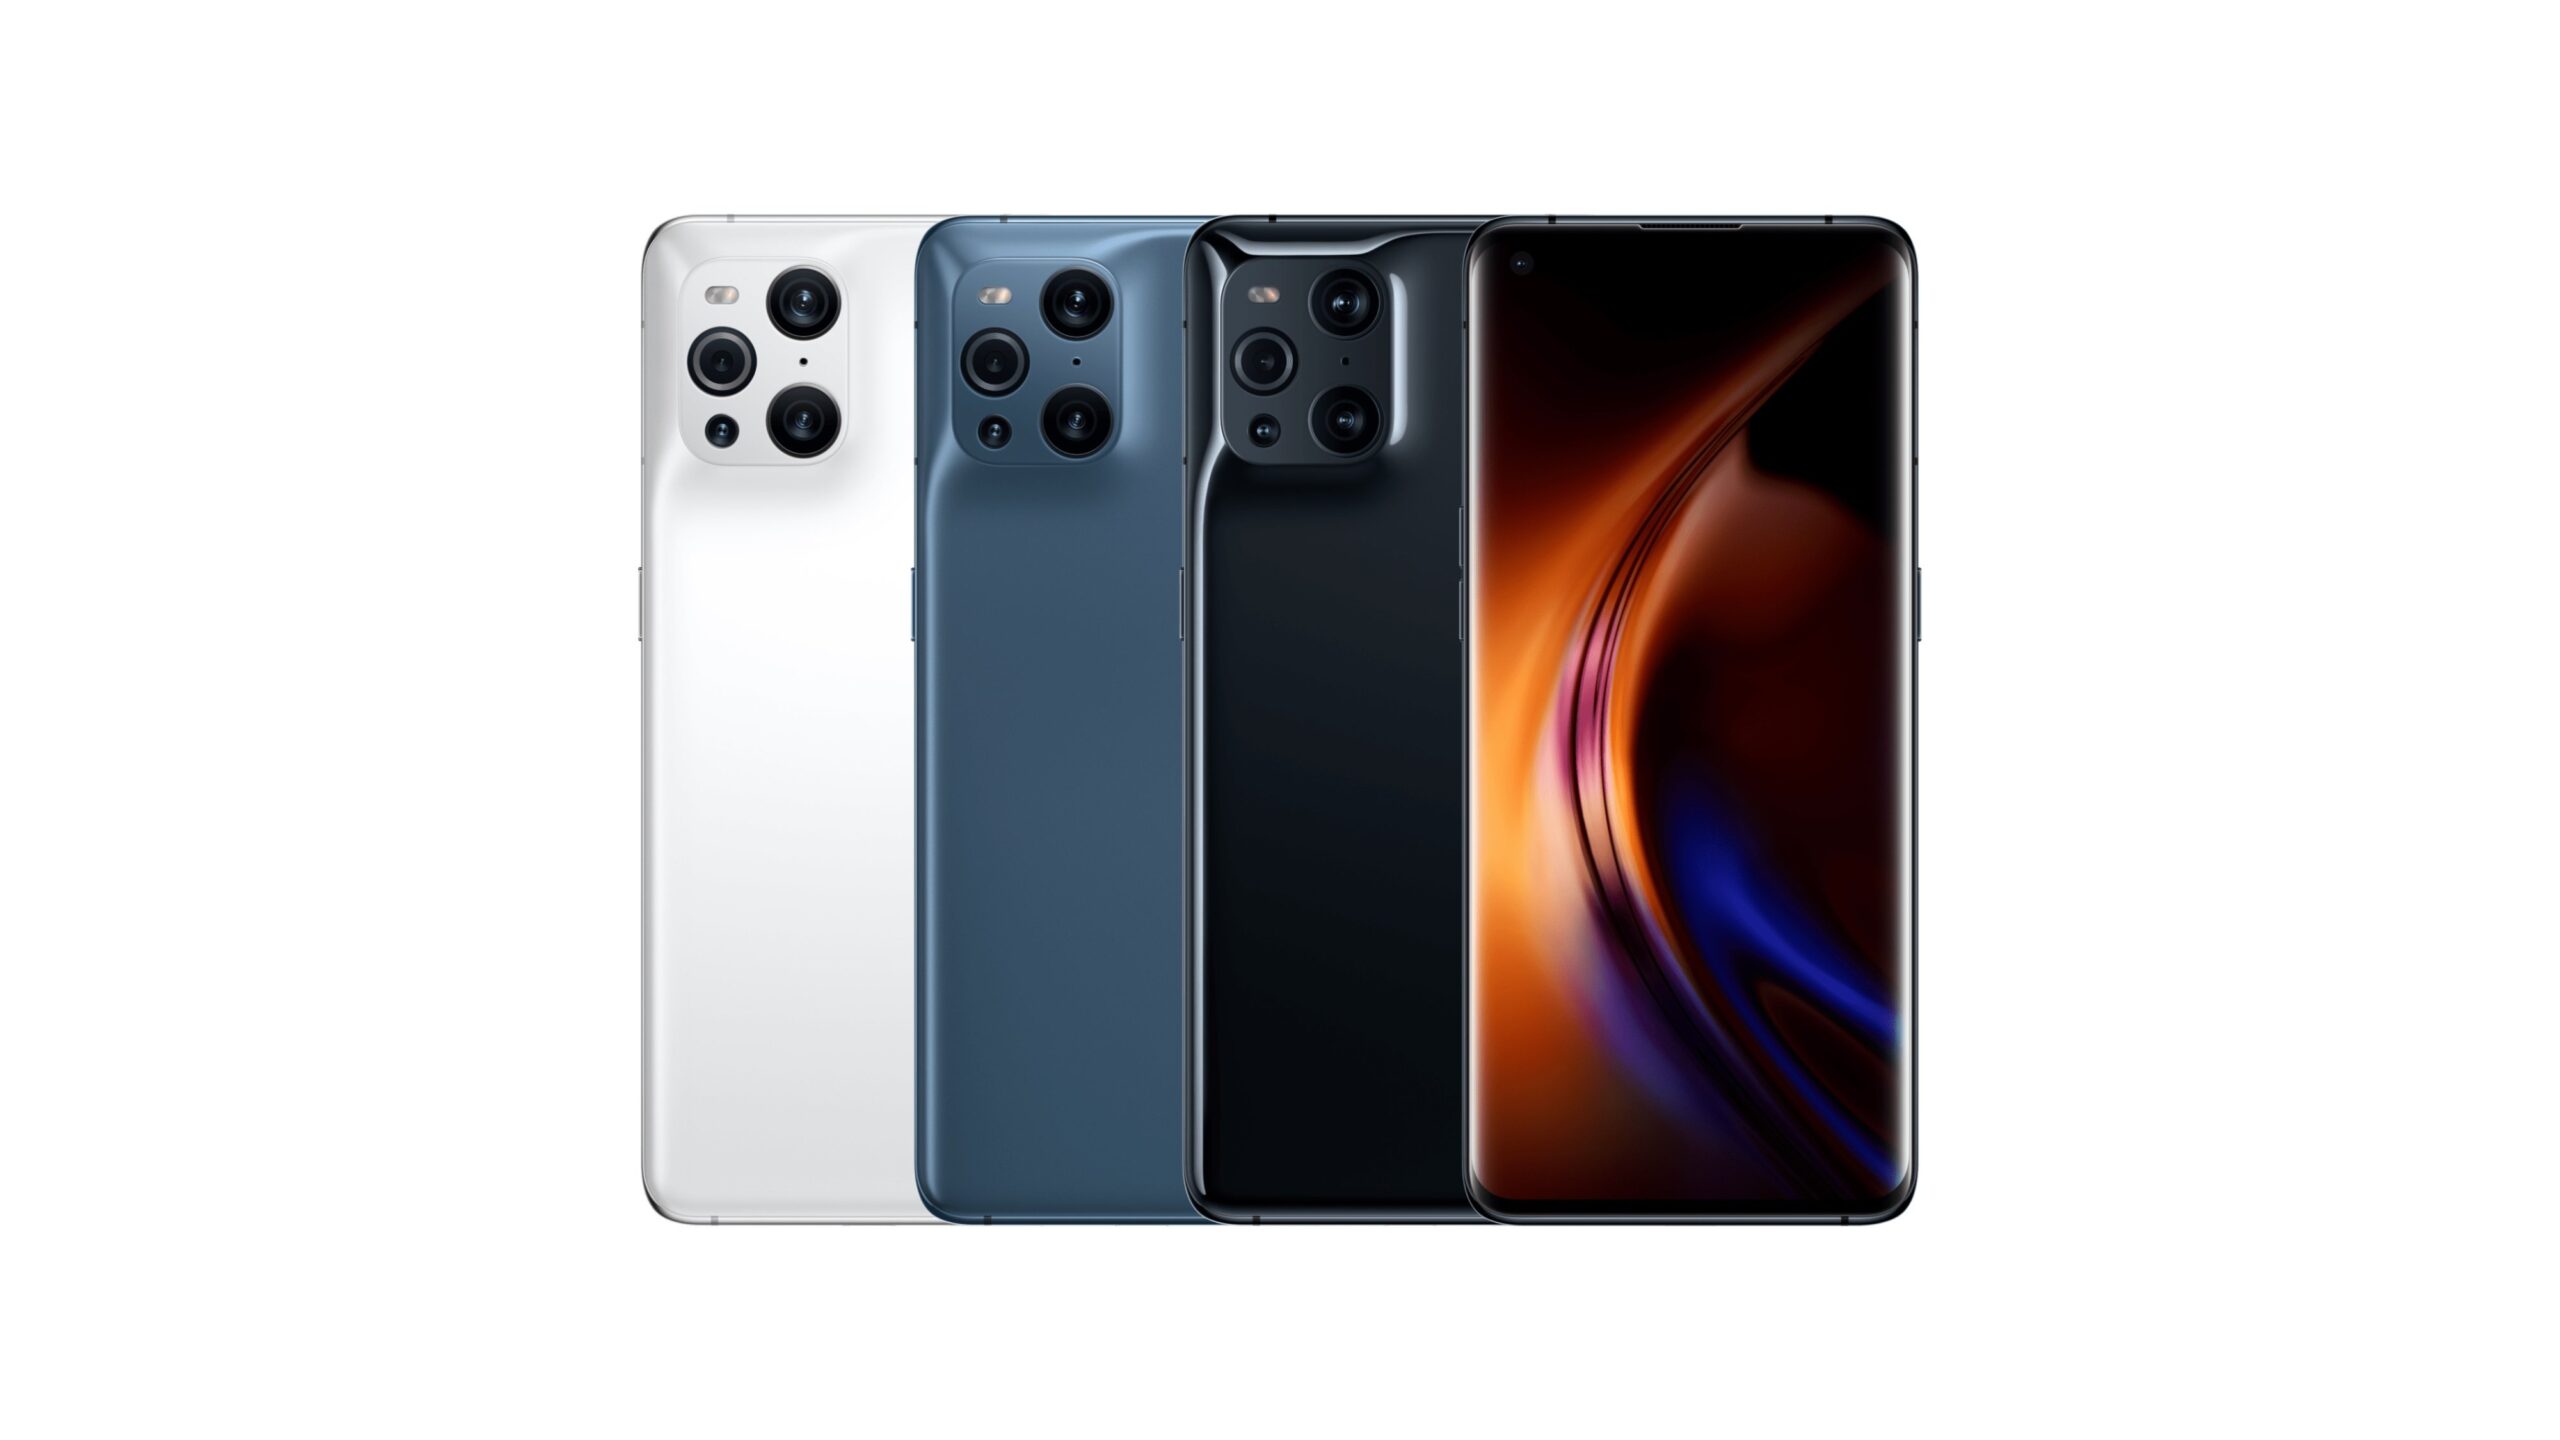 OPPO Find X3, Find X3 Pro Launched: Specs, Features, and Price